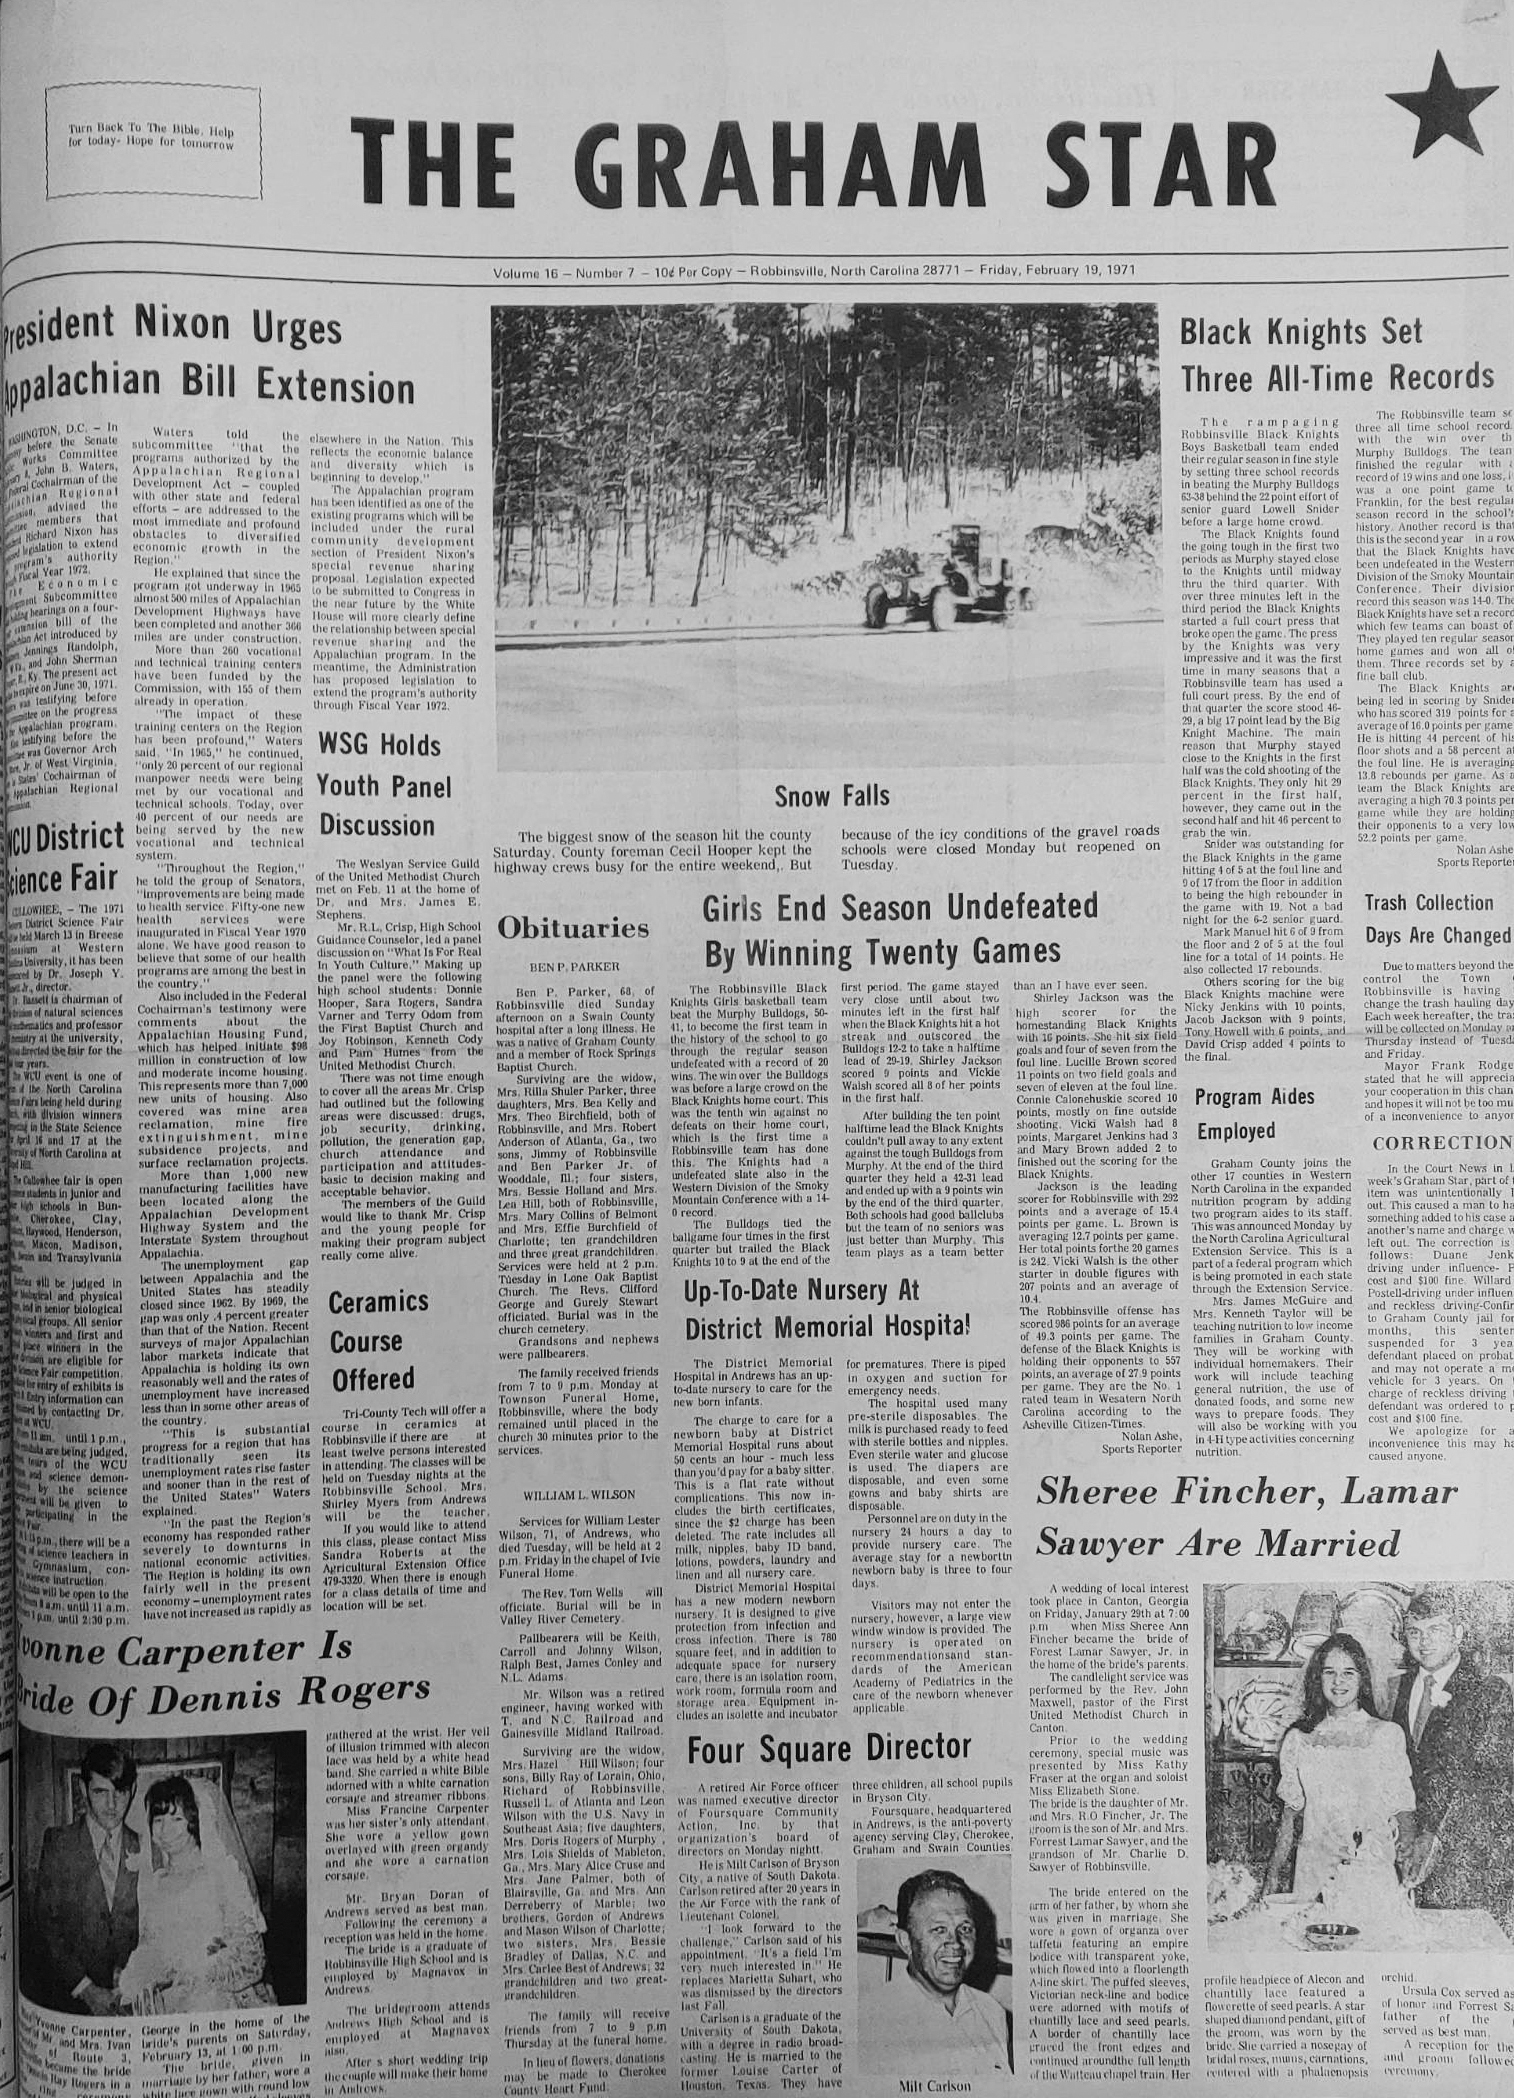 The Graham Star's front page from 50 years ago (Feb. 19, 1971).